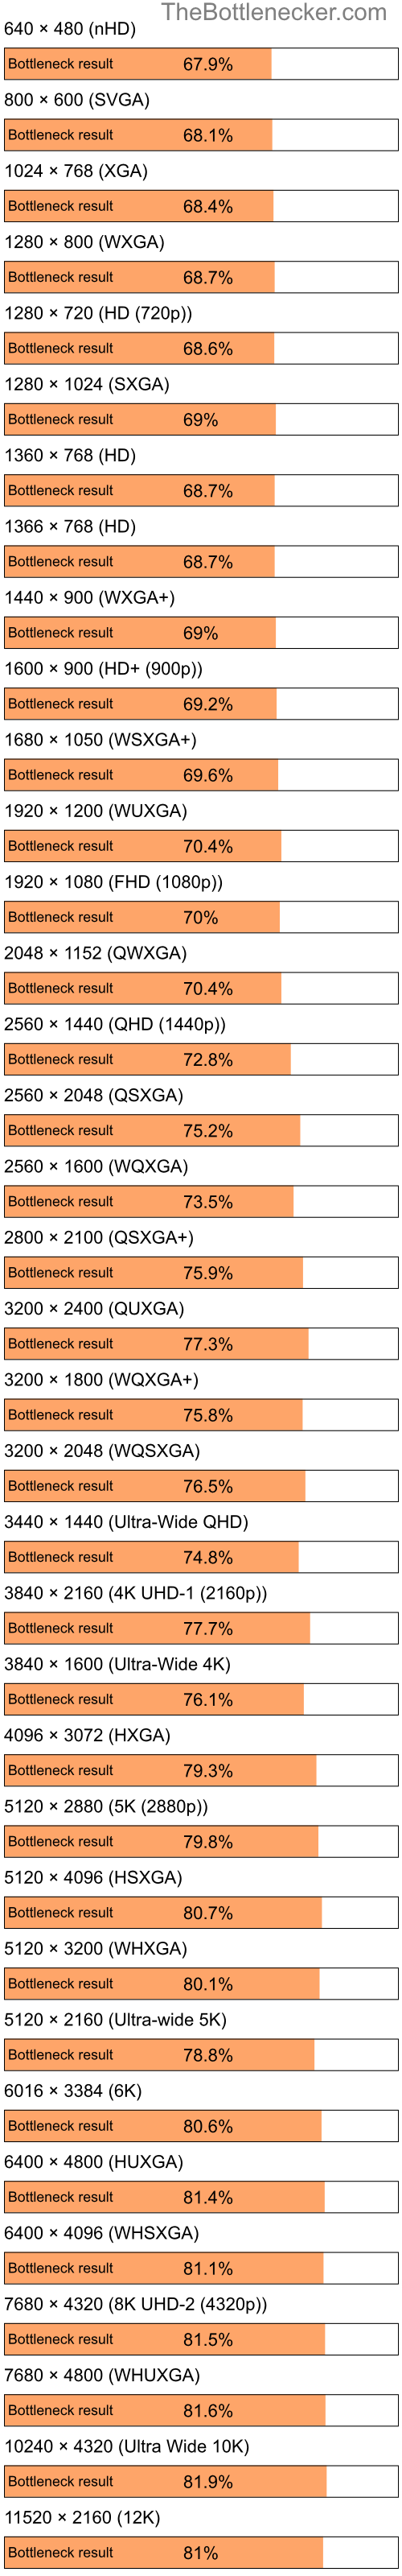 Bottleneck results by resolution for Intel Celeron M and Intel G45 in Graphic Card Intense Tasks